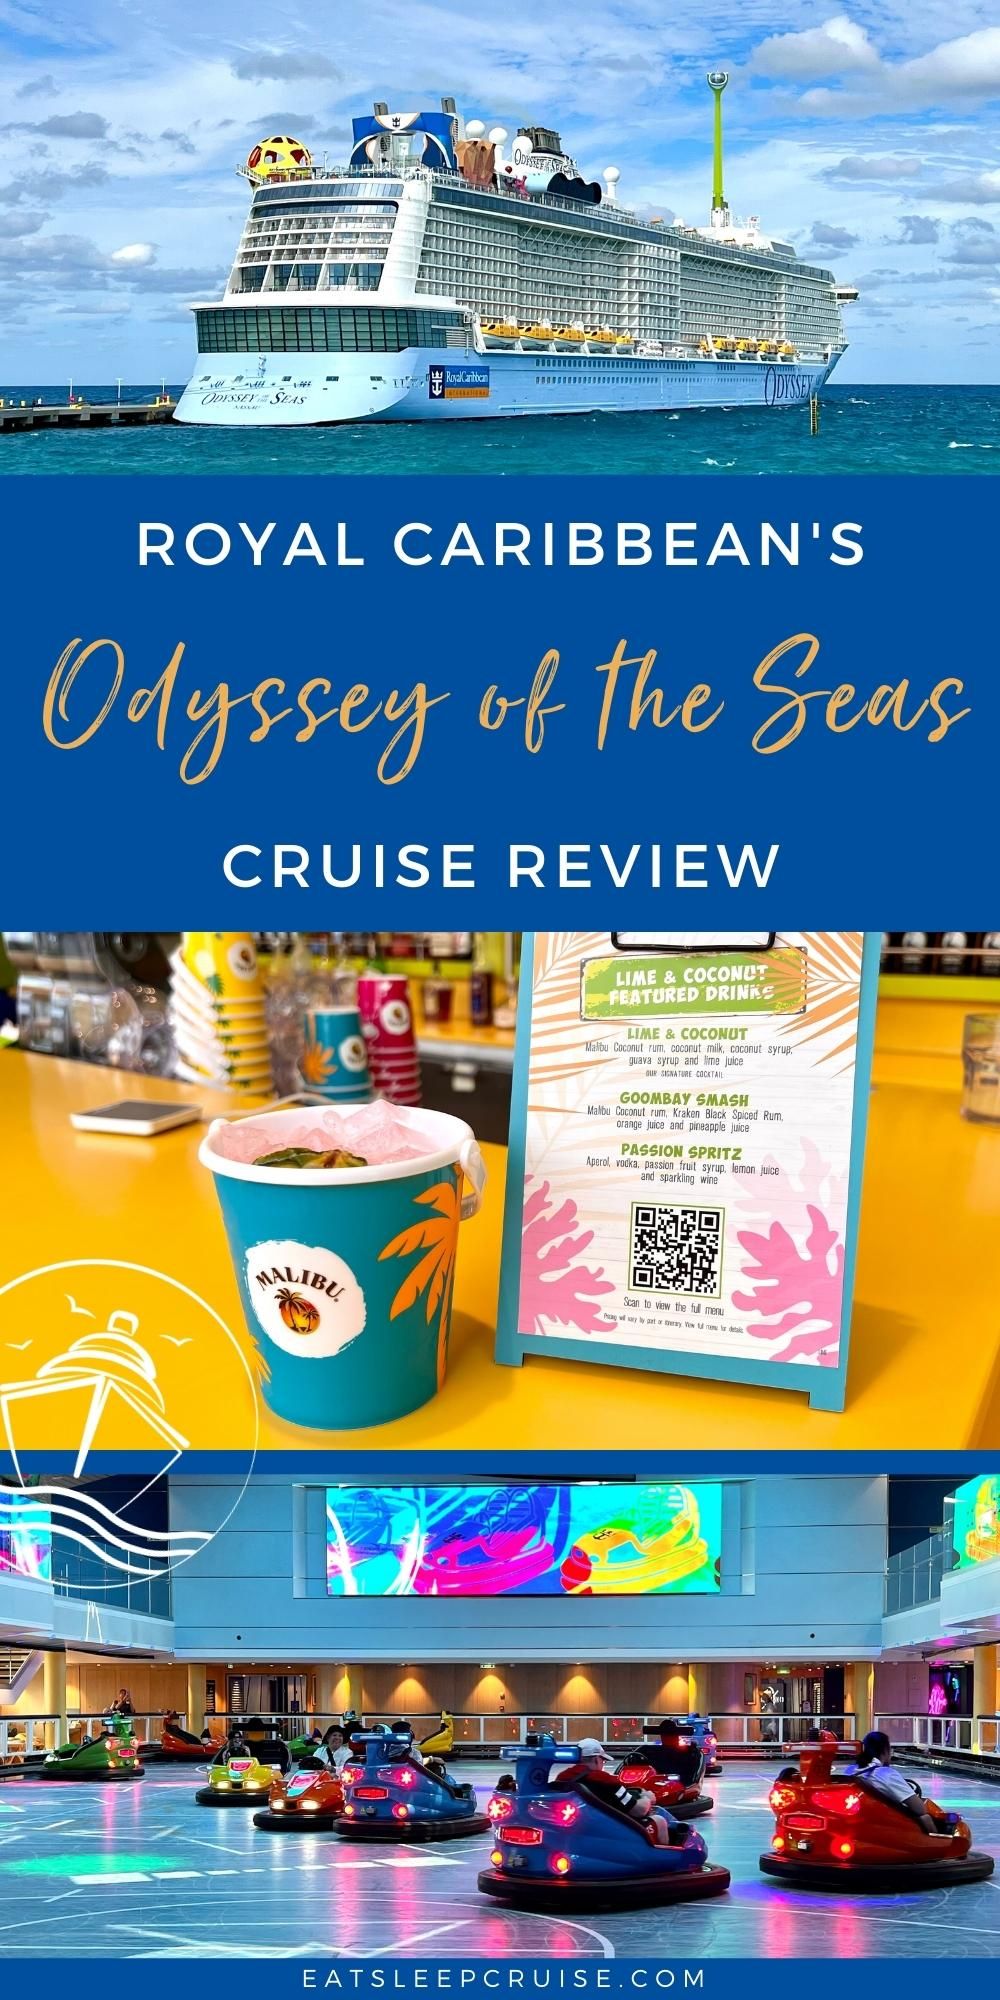 Royal Caribbean's Odyssey of the Seas Cruise Review